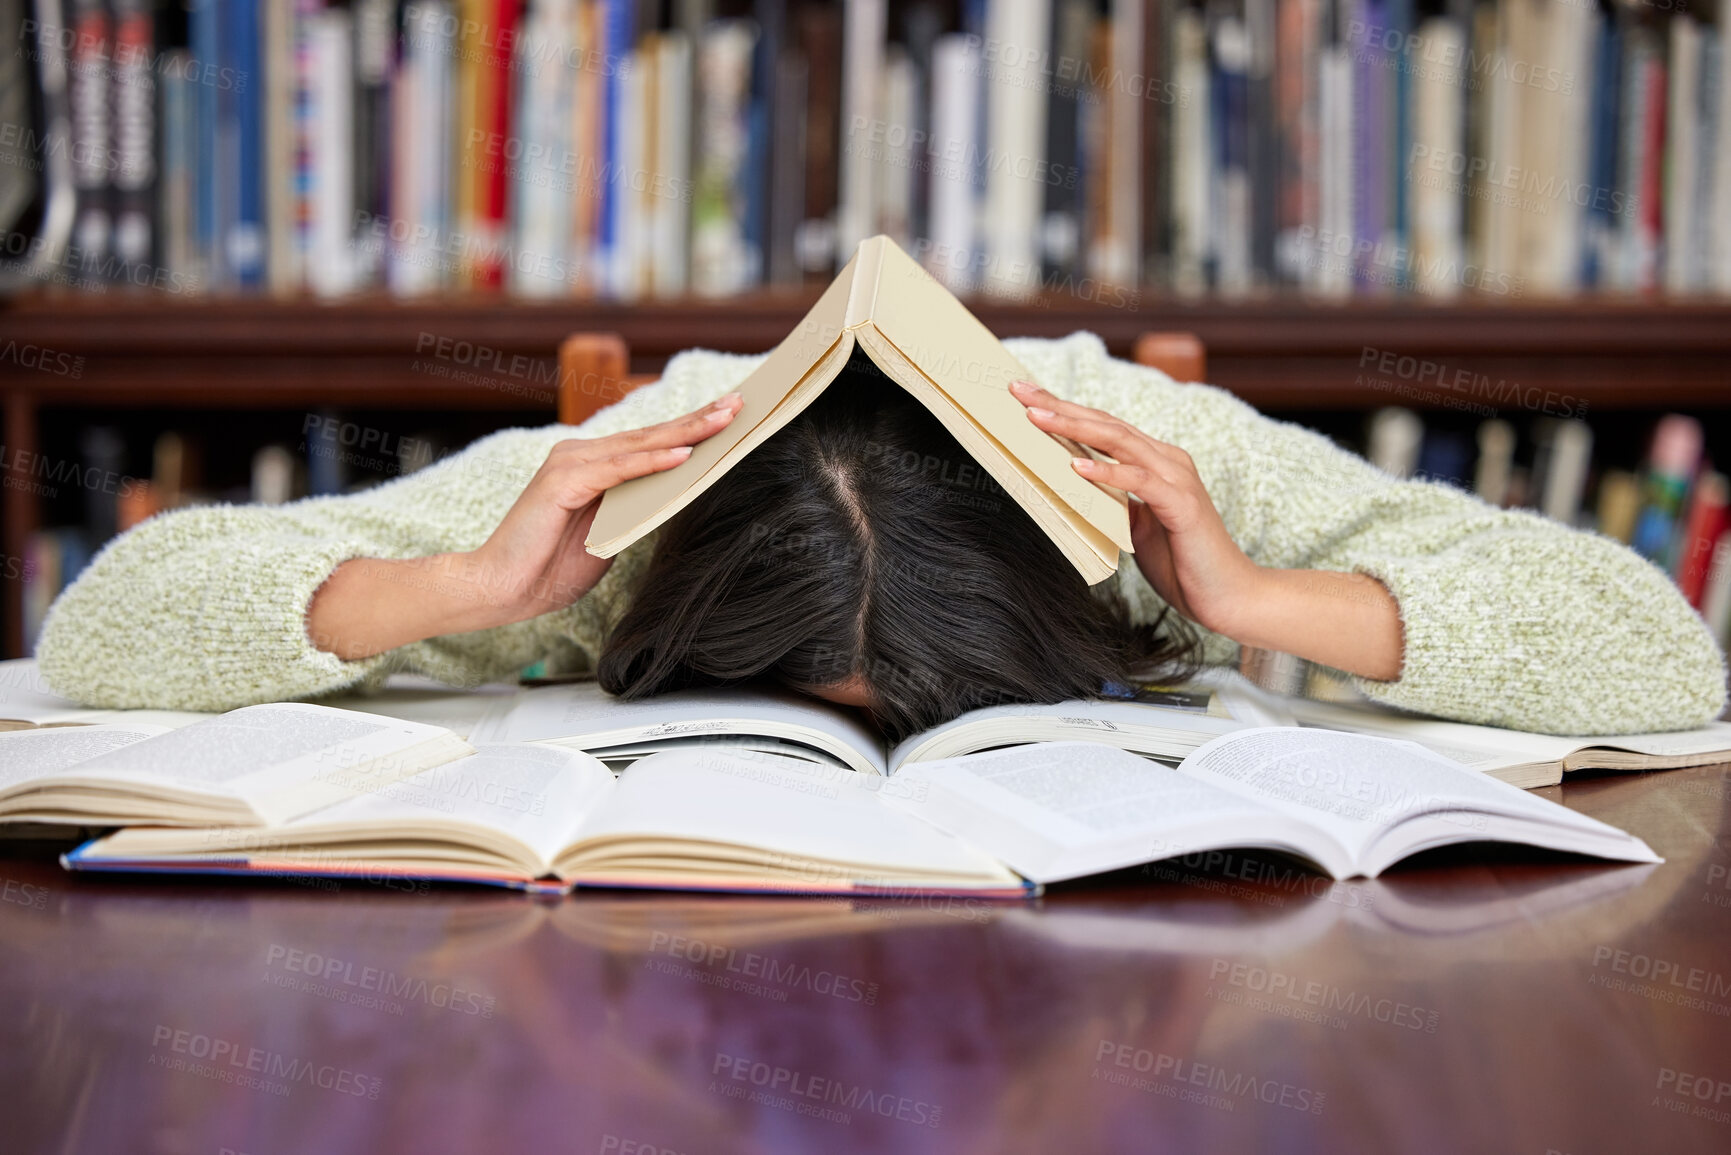 Buy stock photo Shot of a young female studying in a college library and looking stressed